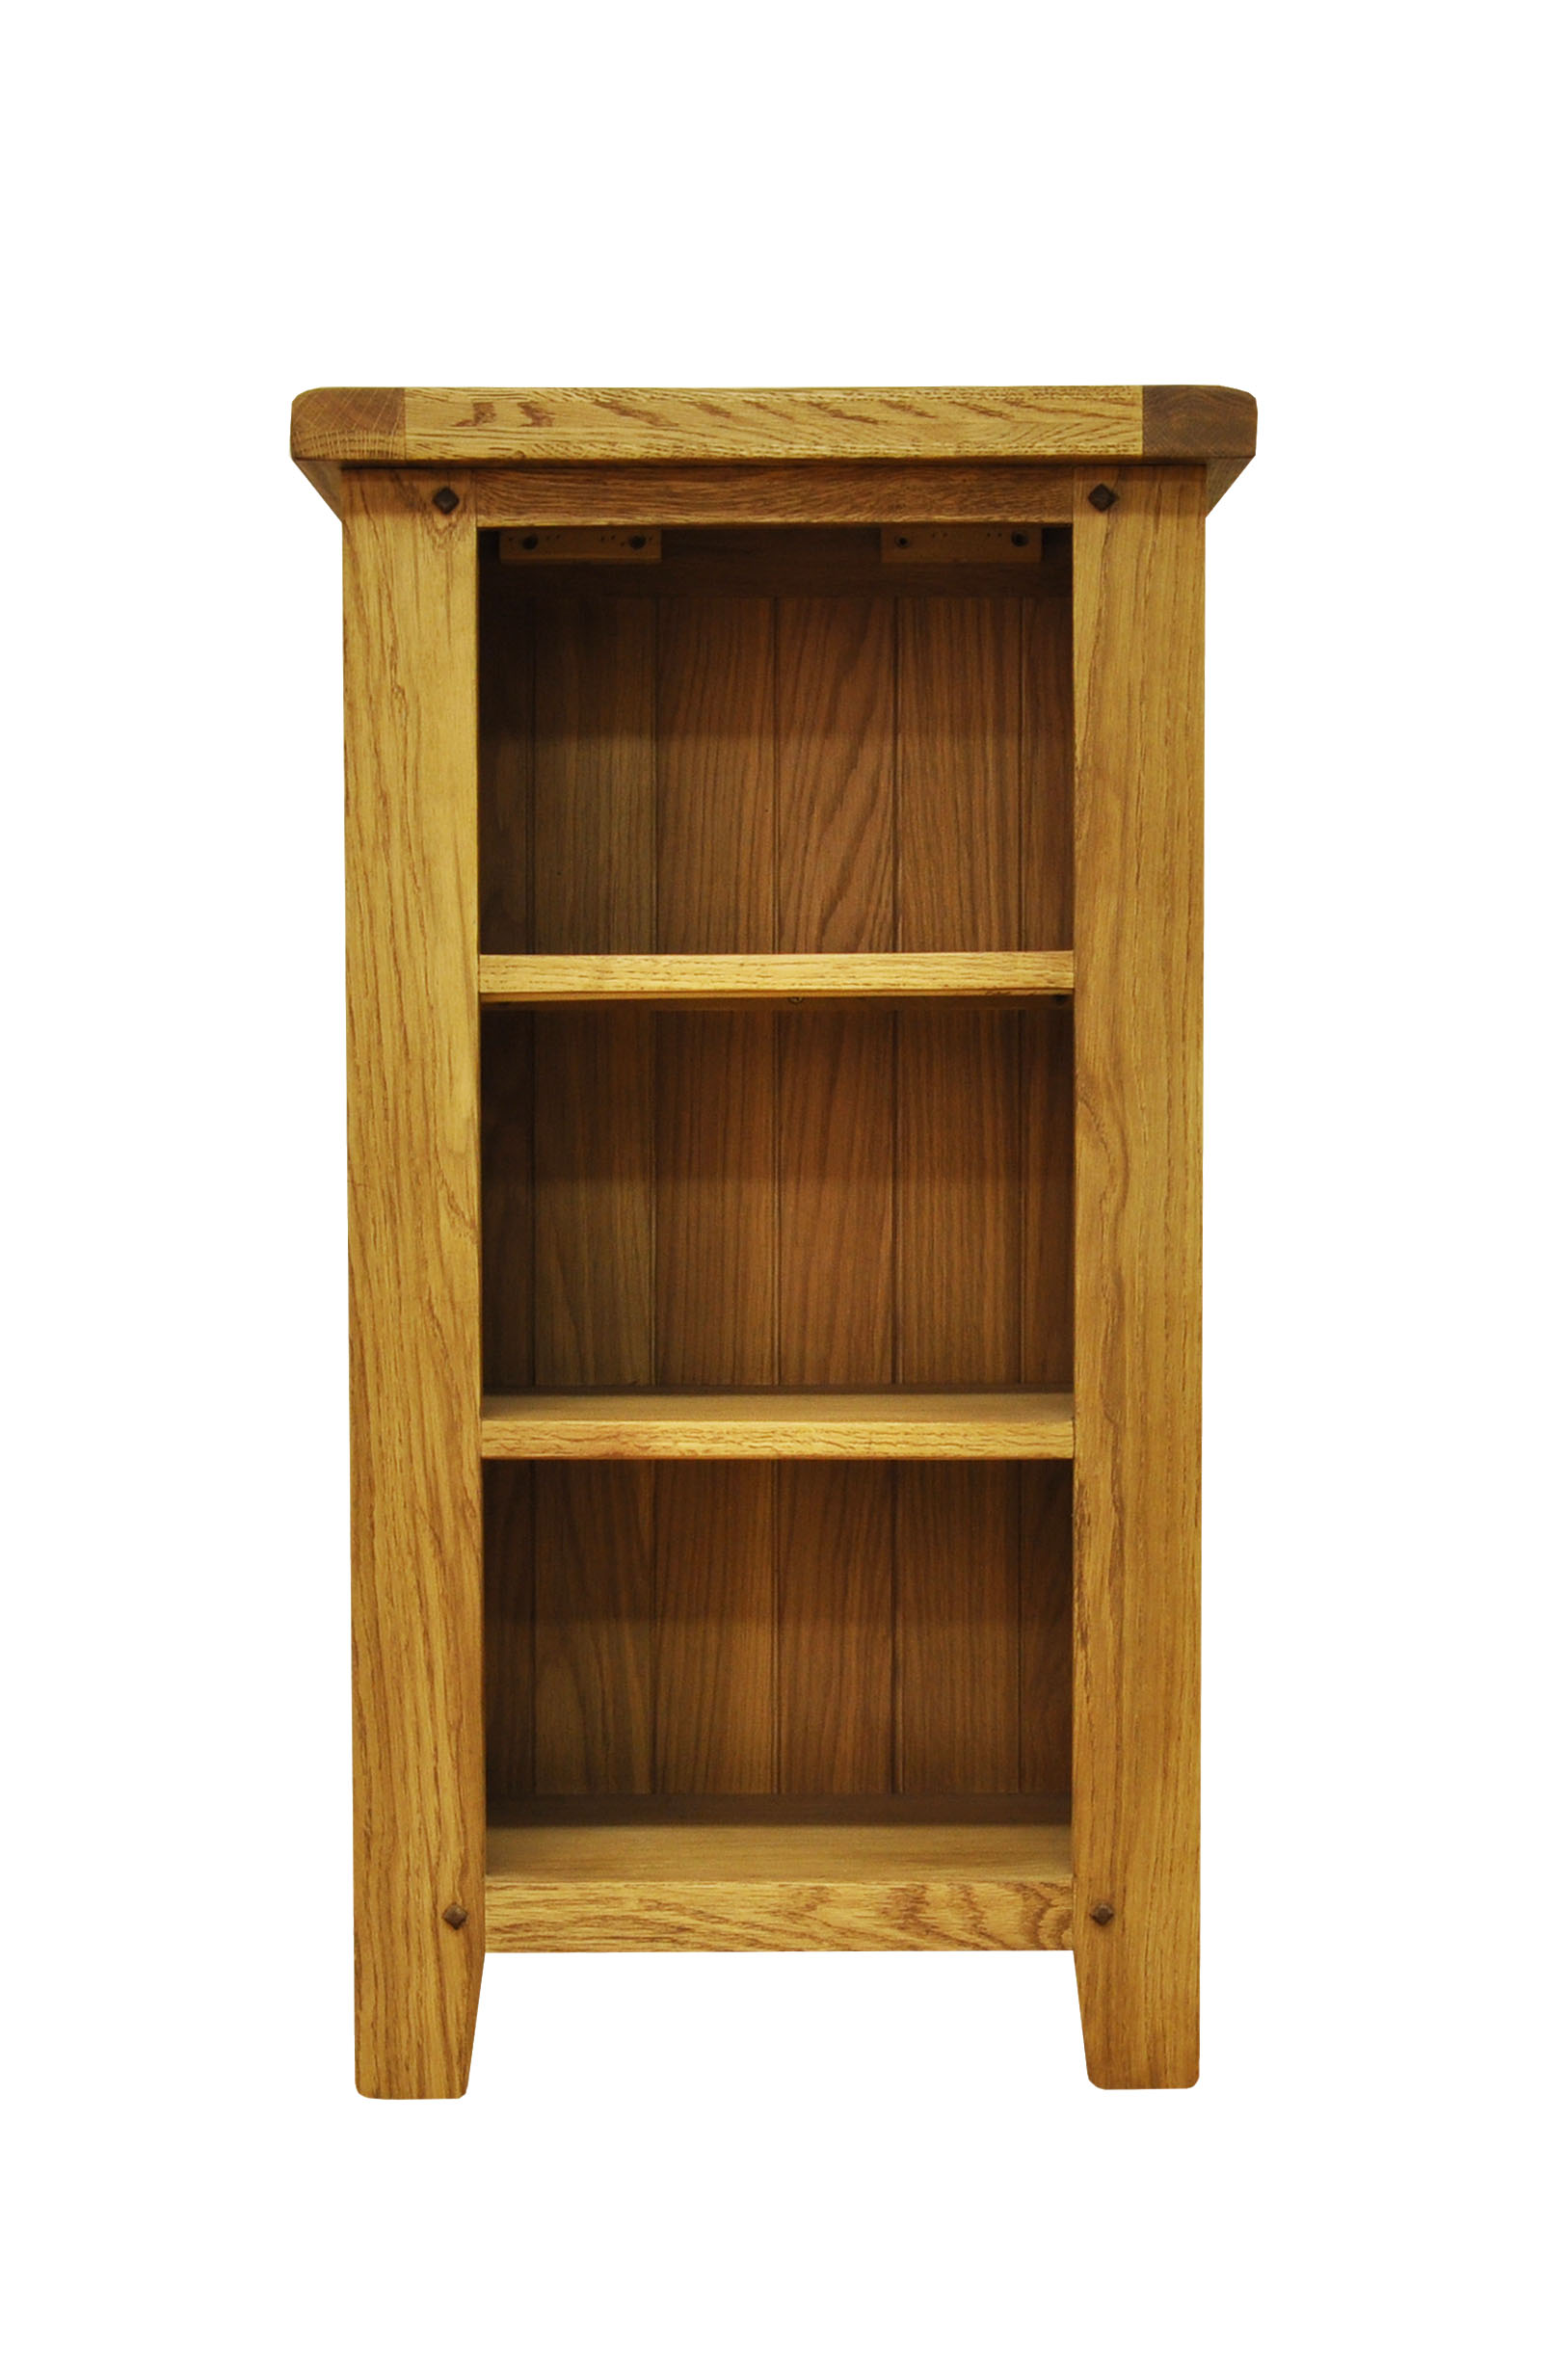 Kettle Stamford Small Narrow Bookcase